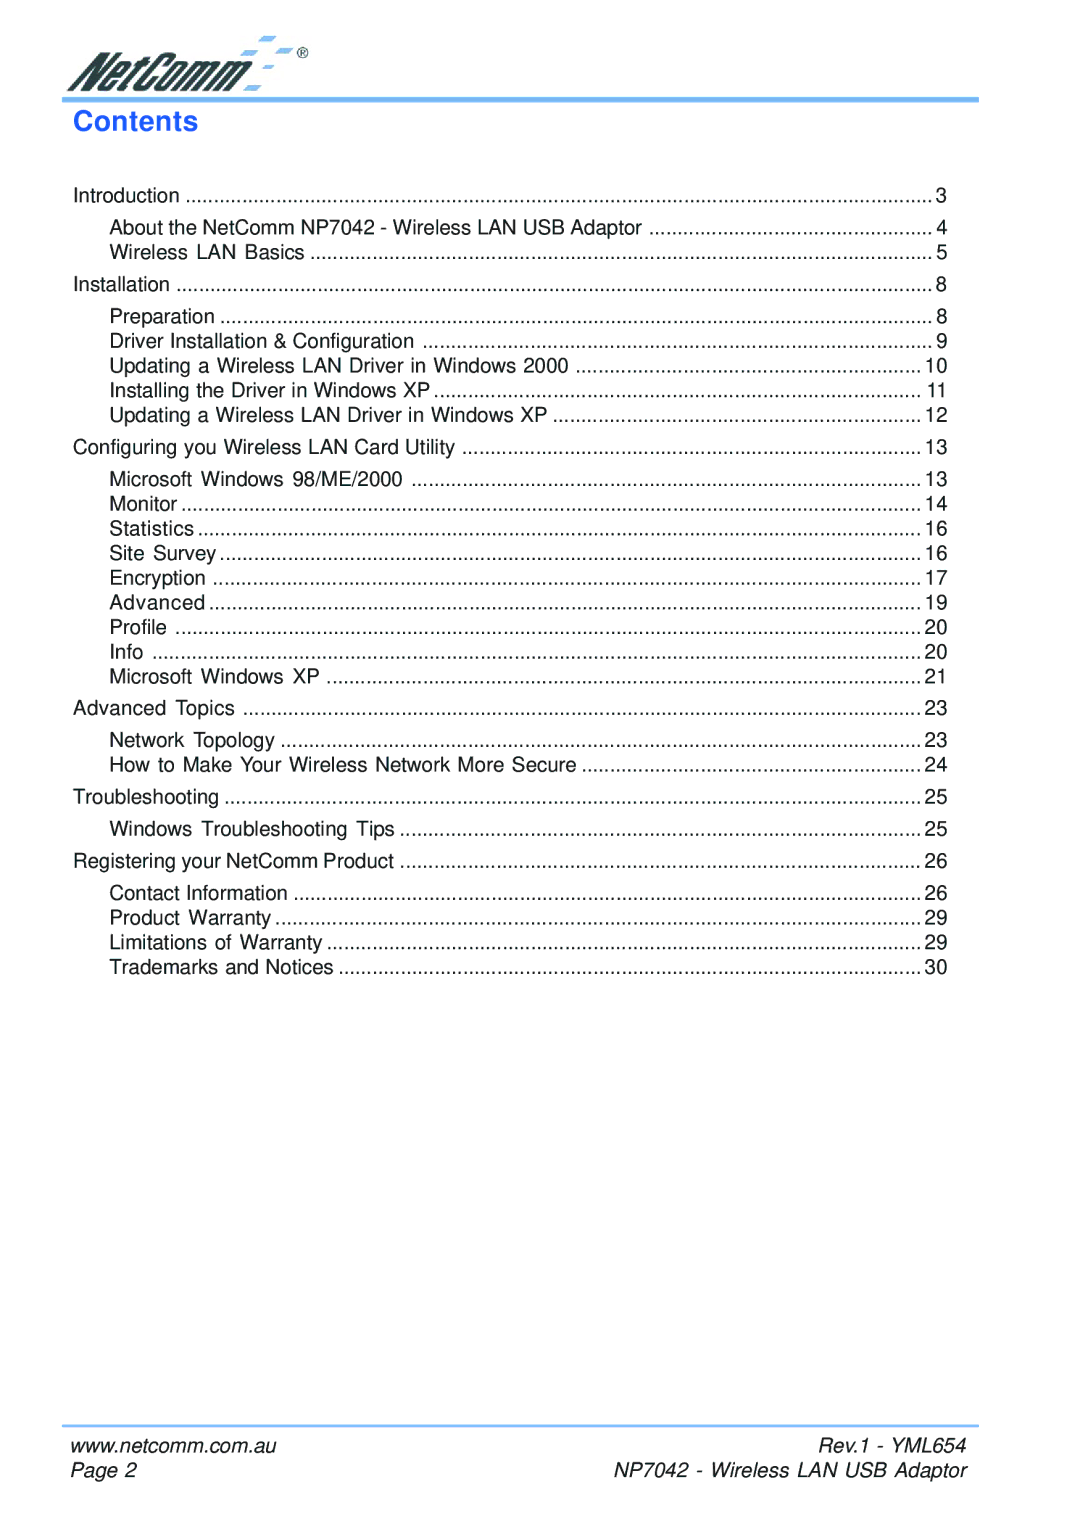 NetComm NP7042 manual Contents 